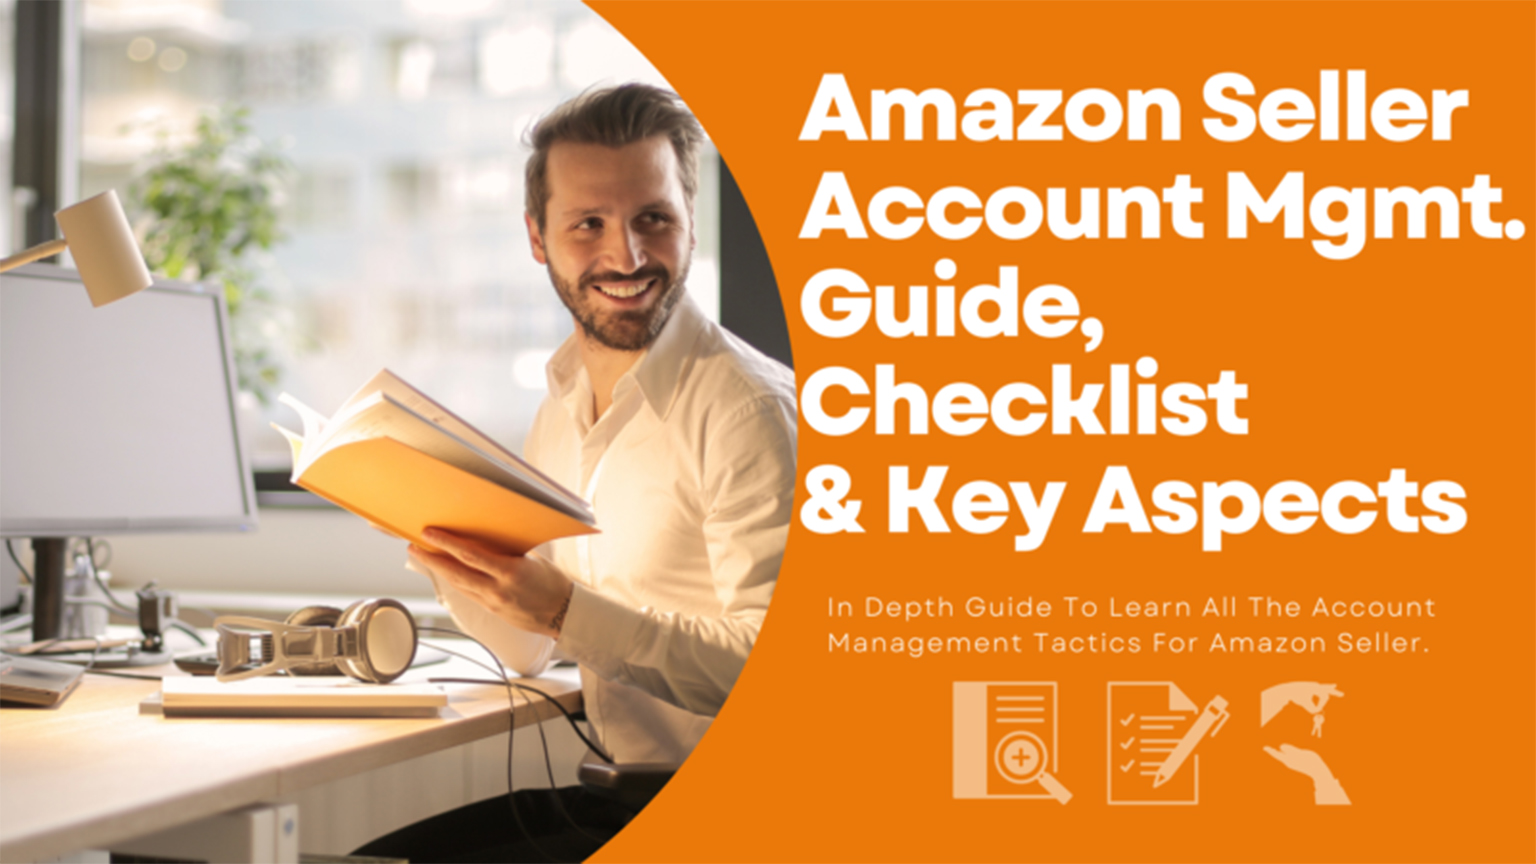 WHY IS AMAZON ACCOUNT MANAGEMENT IMPORTANT?